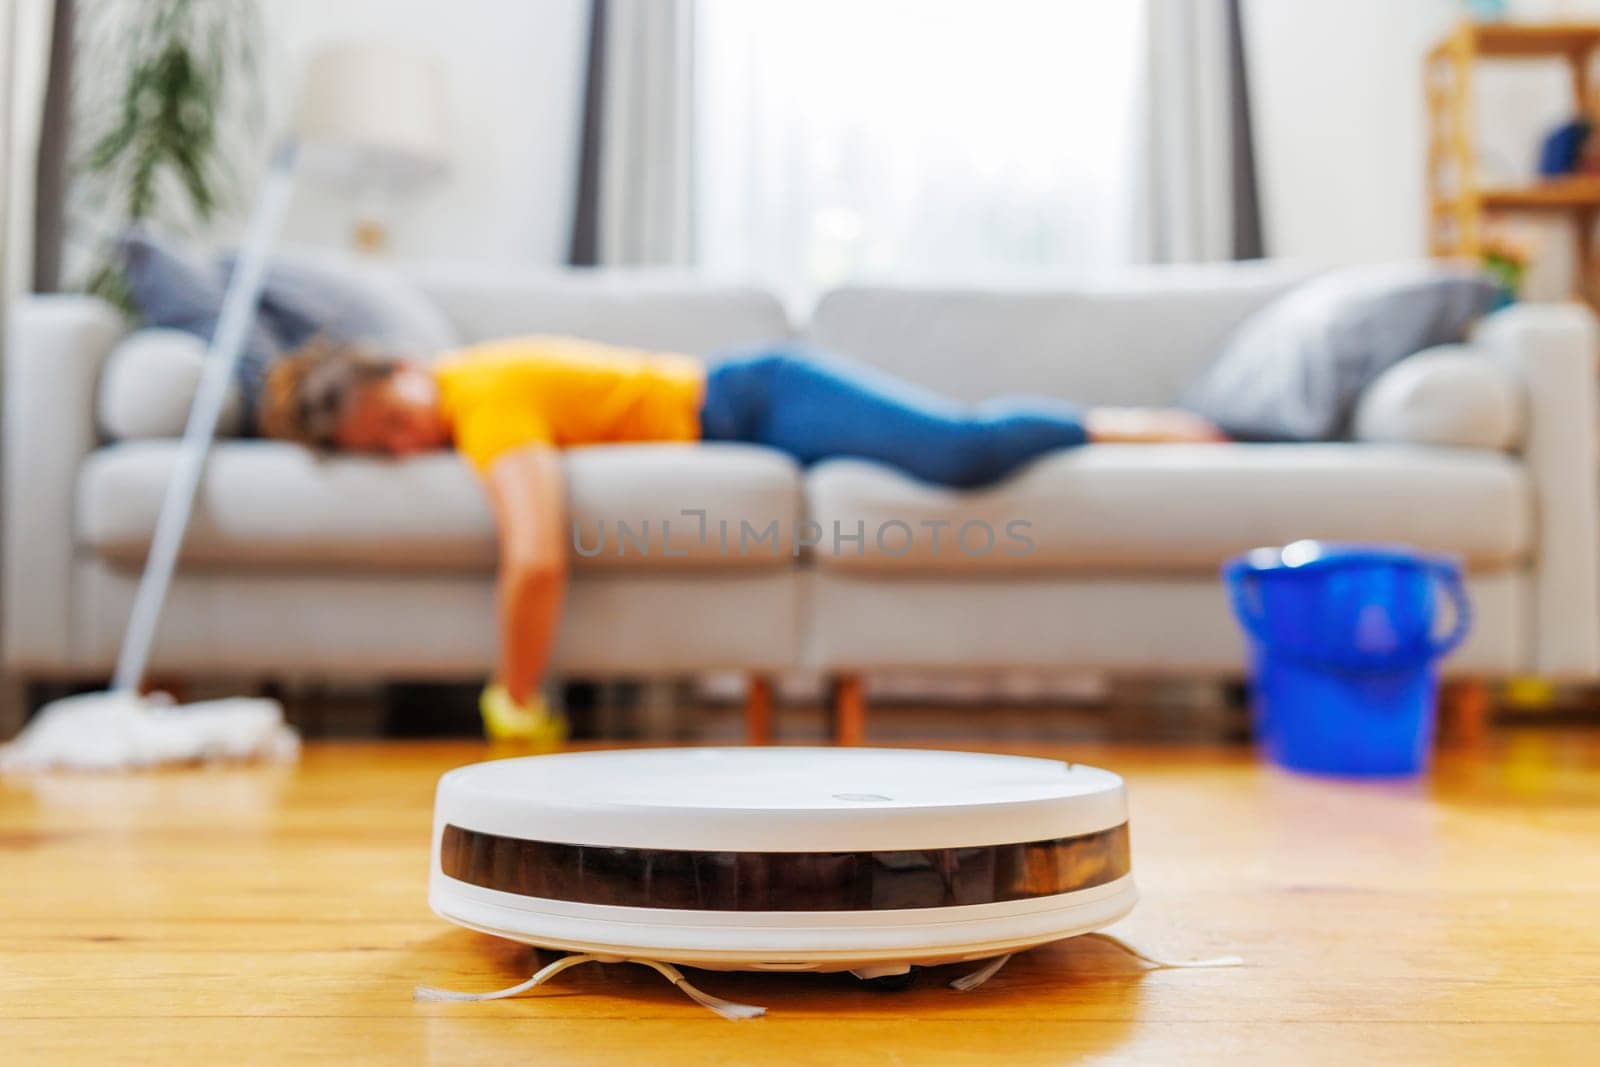 A robot vacuum cleaner is operating on a wooden floor in a living room where a woman is relaxing on the couch, symbolizing convenience and modern home cleaning technology.